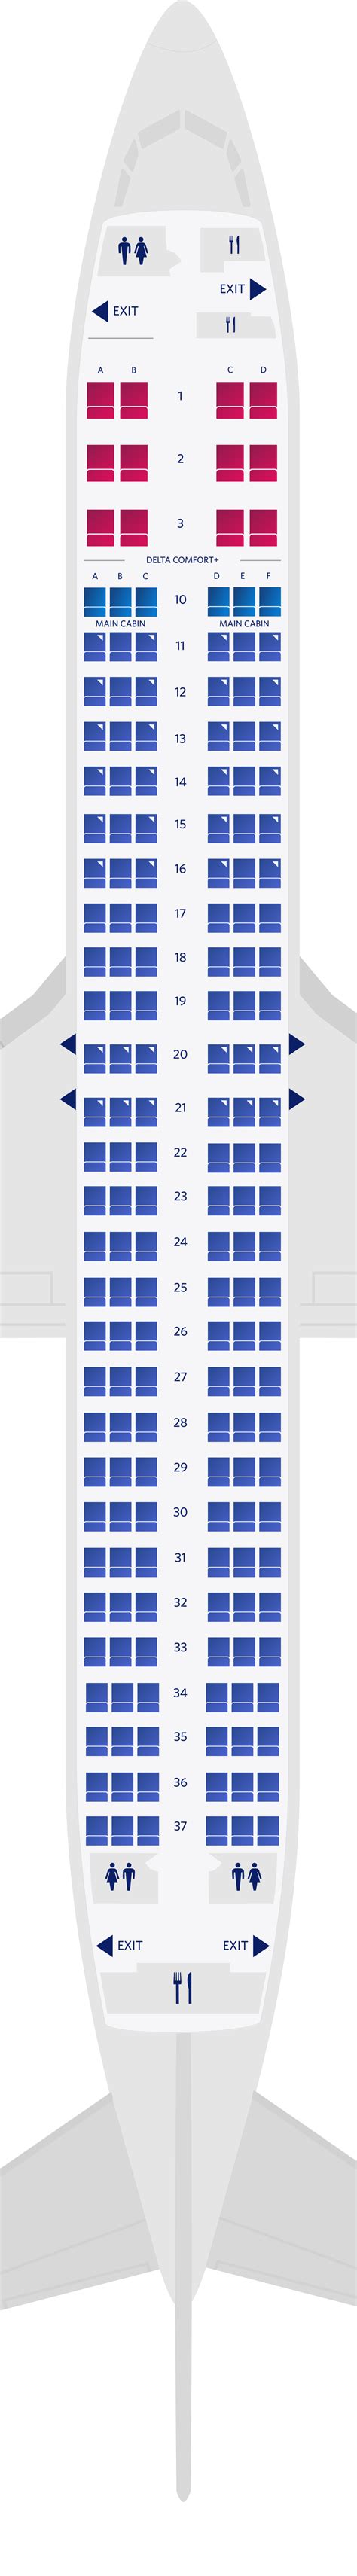 Delta seat map 737. Things To Know About Delta seat map 737. 